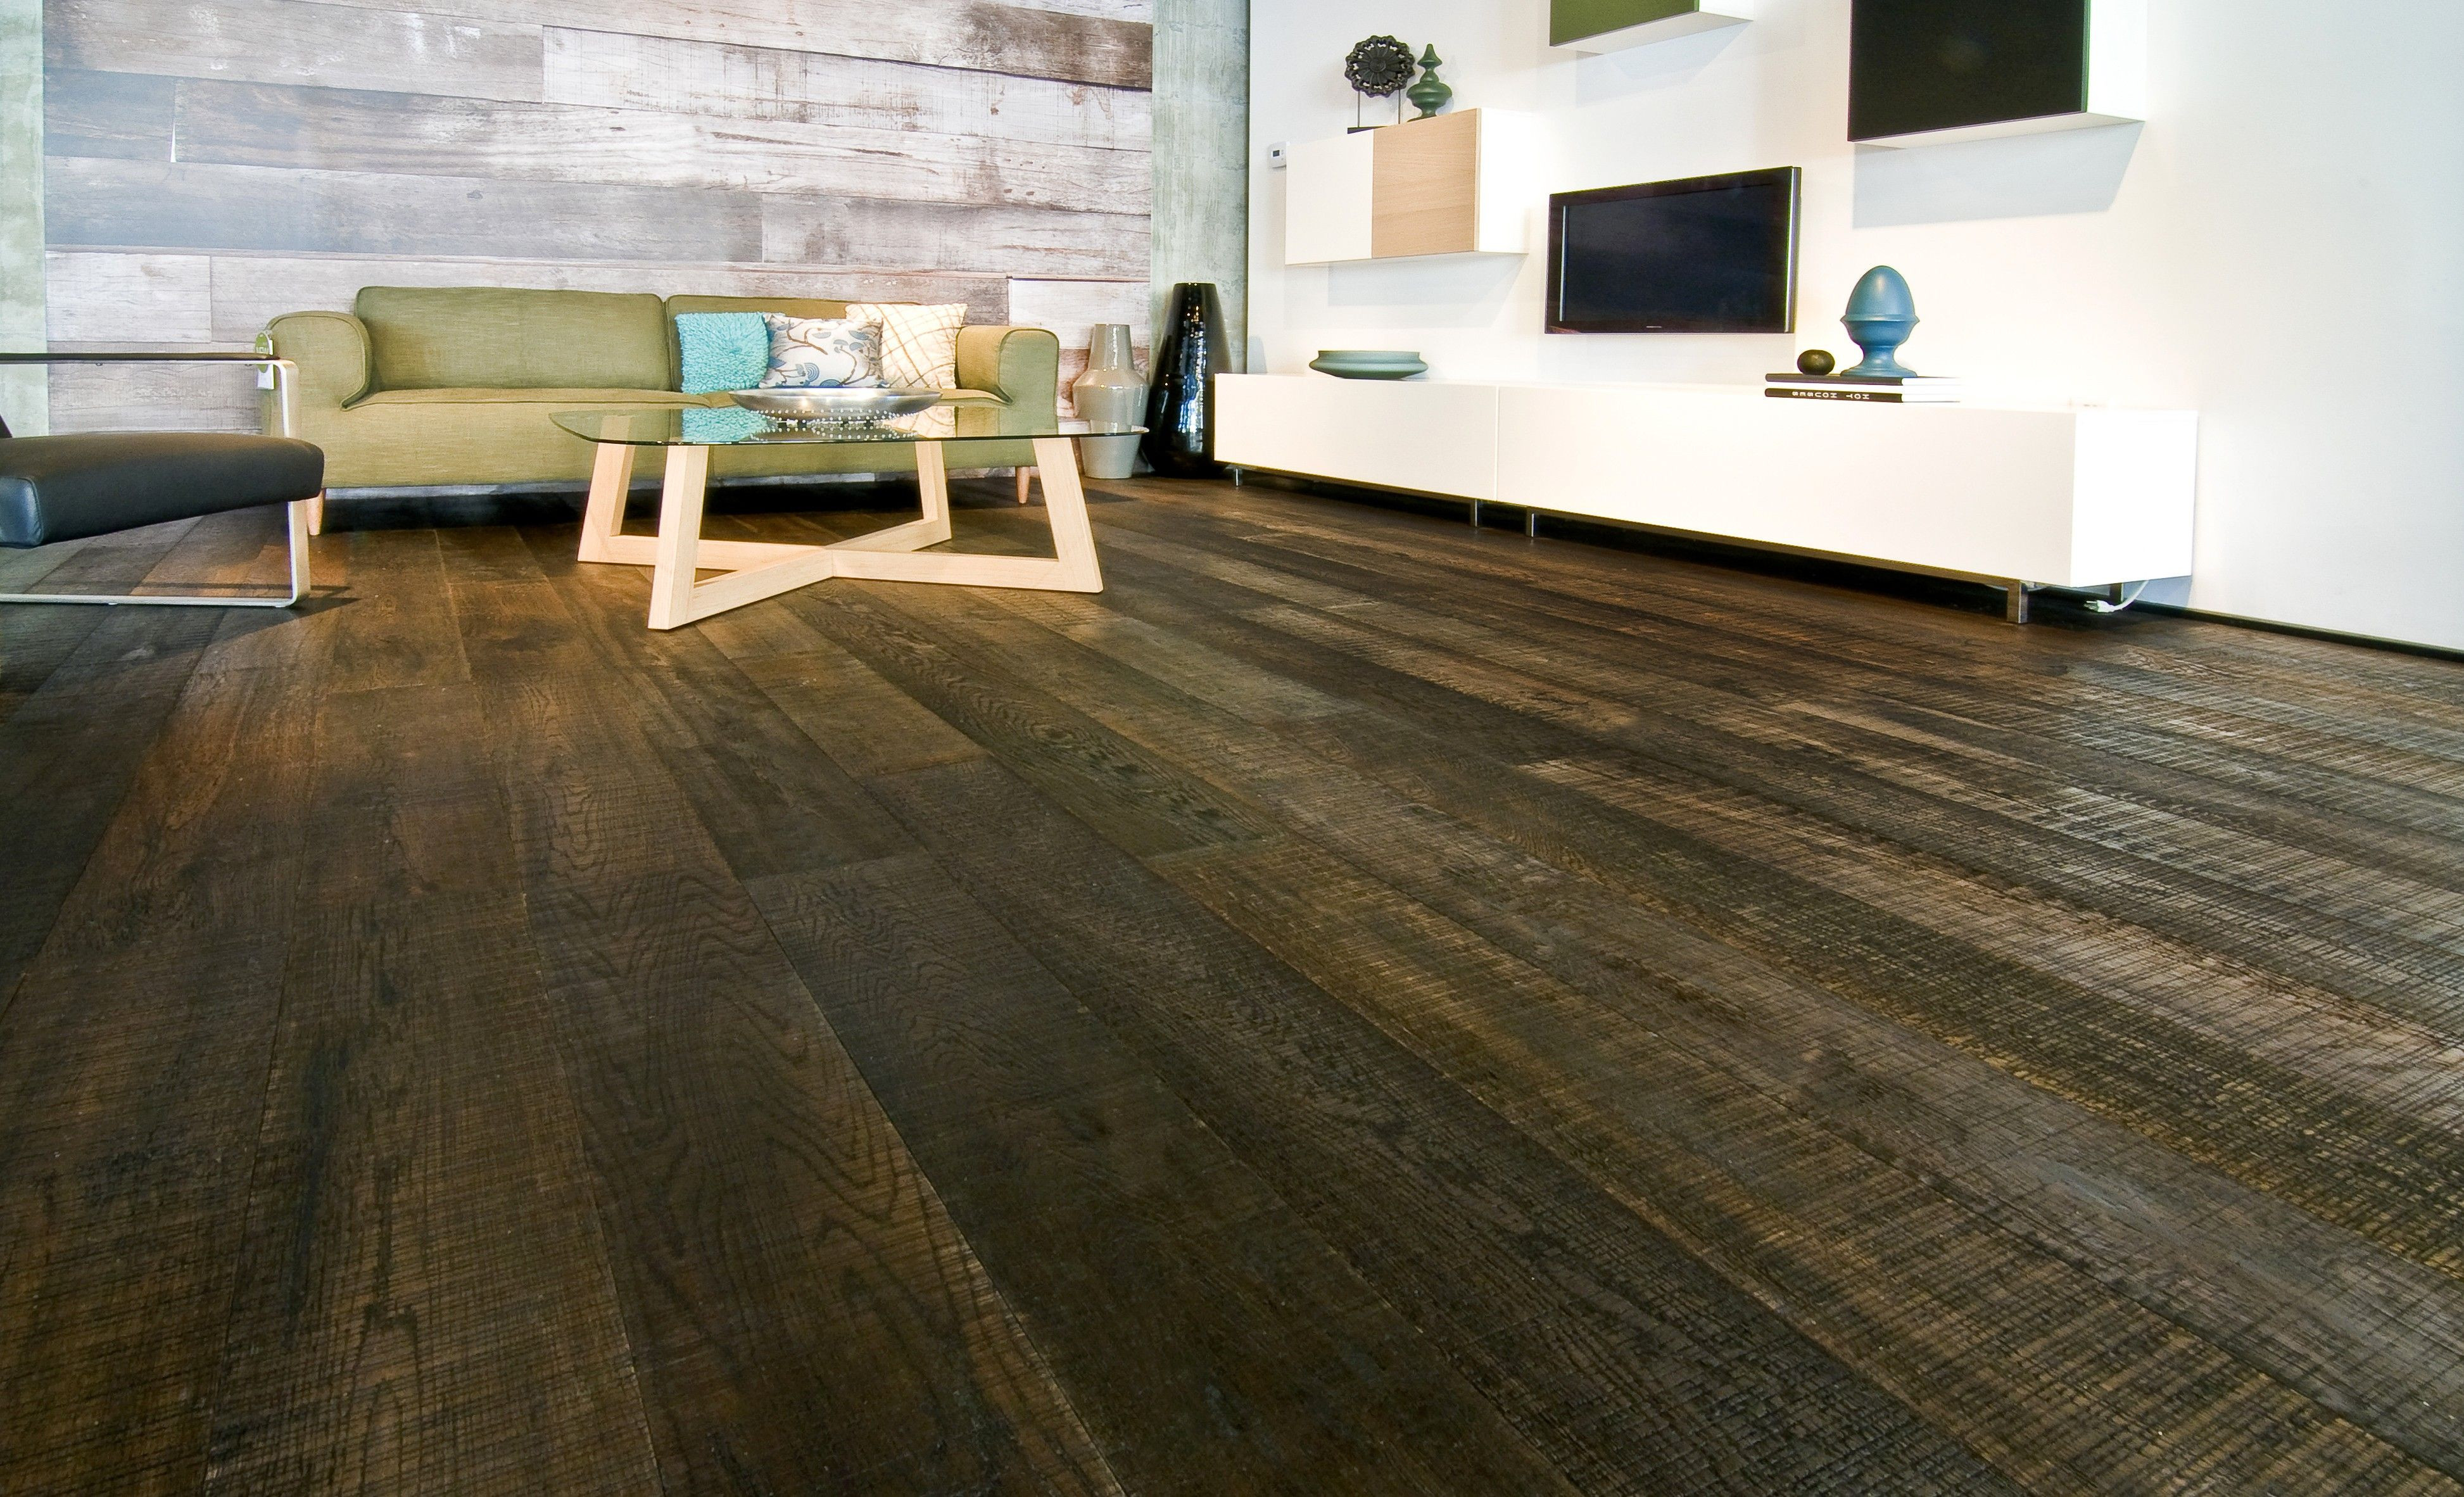 11 Stylish Hardwood Floor Cleaning Companies Near Me 2023 free download hardwood floor cleaning companies near me of hardwood flooring companies near me how to clean laminate hardwood intended for hardwood flooring companies near me where to buy hardwood floorin